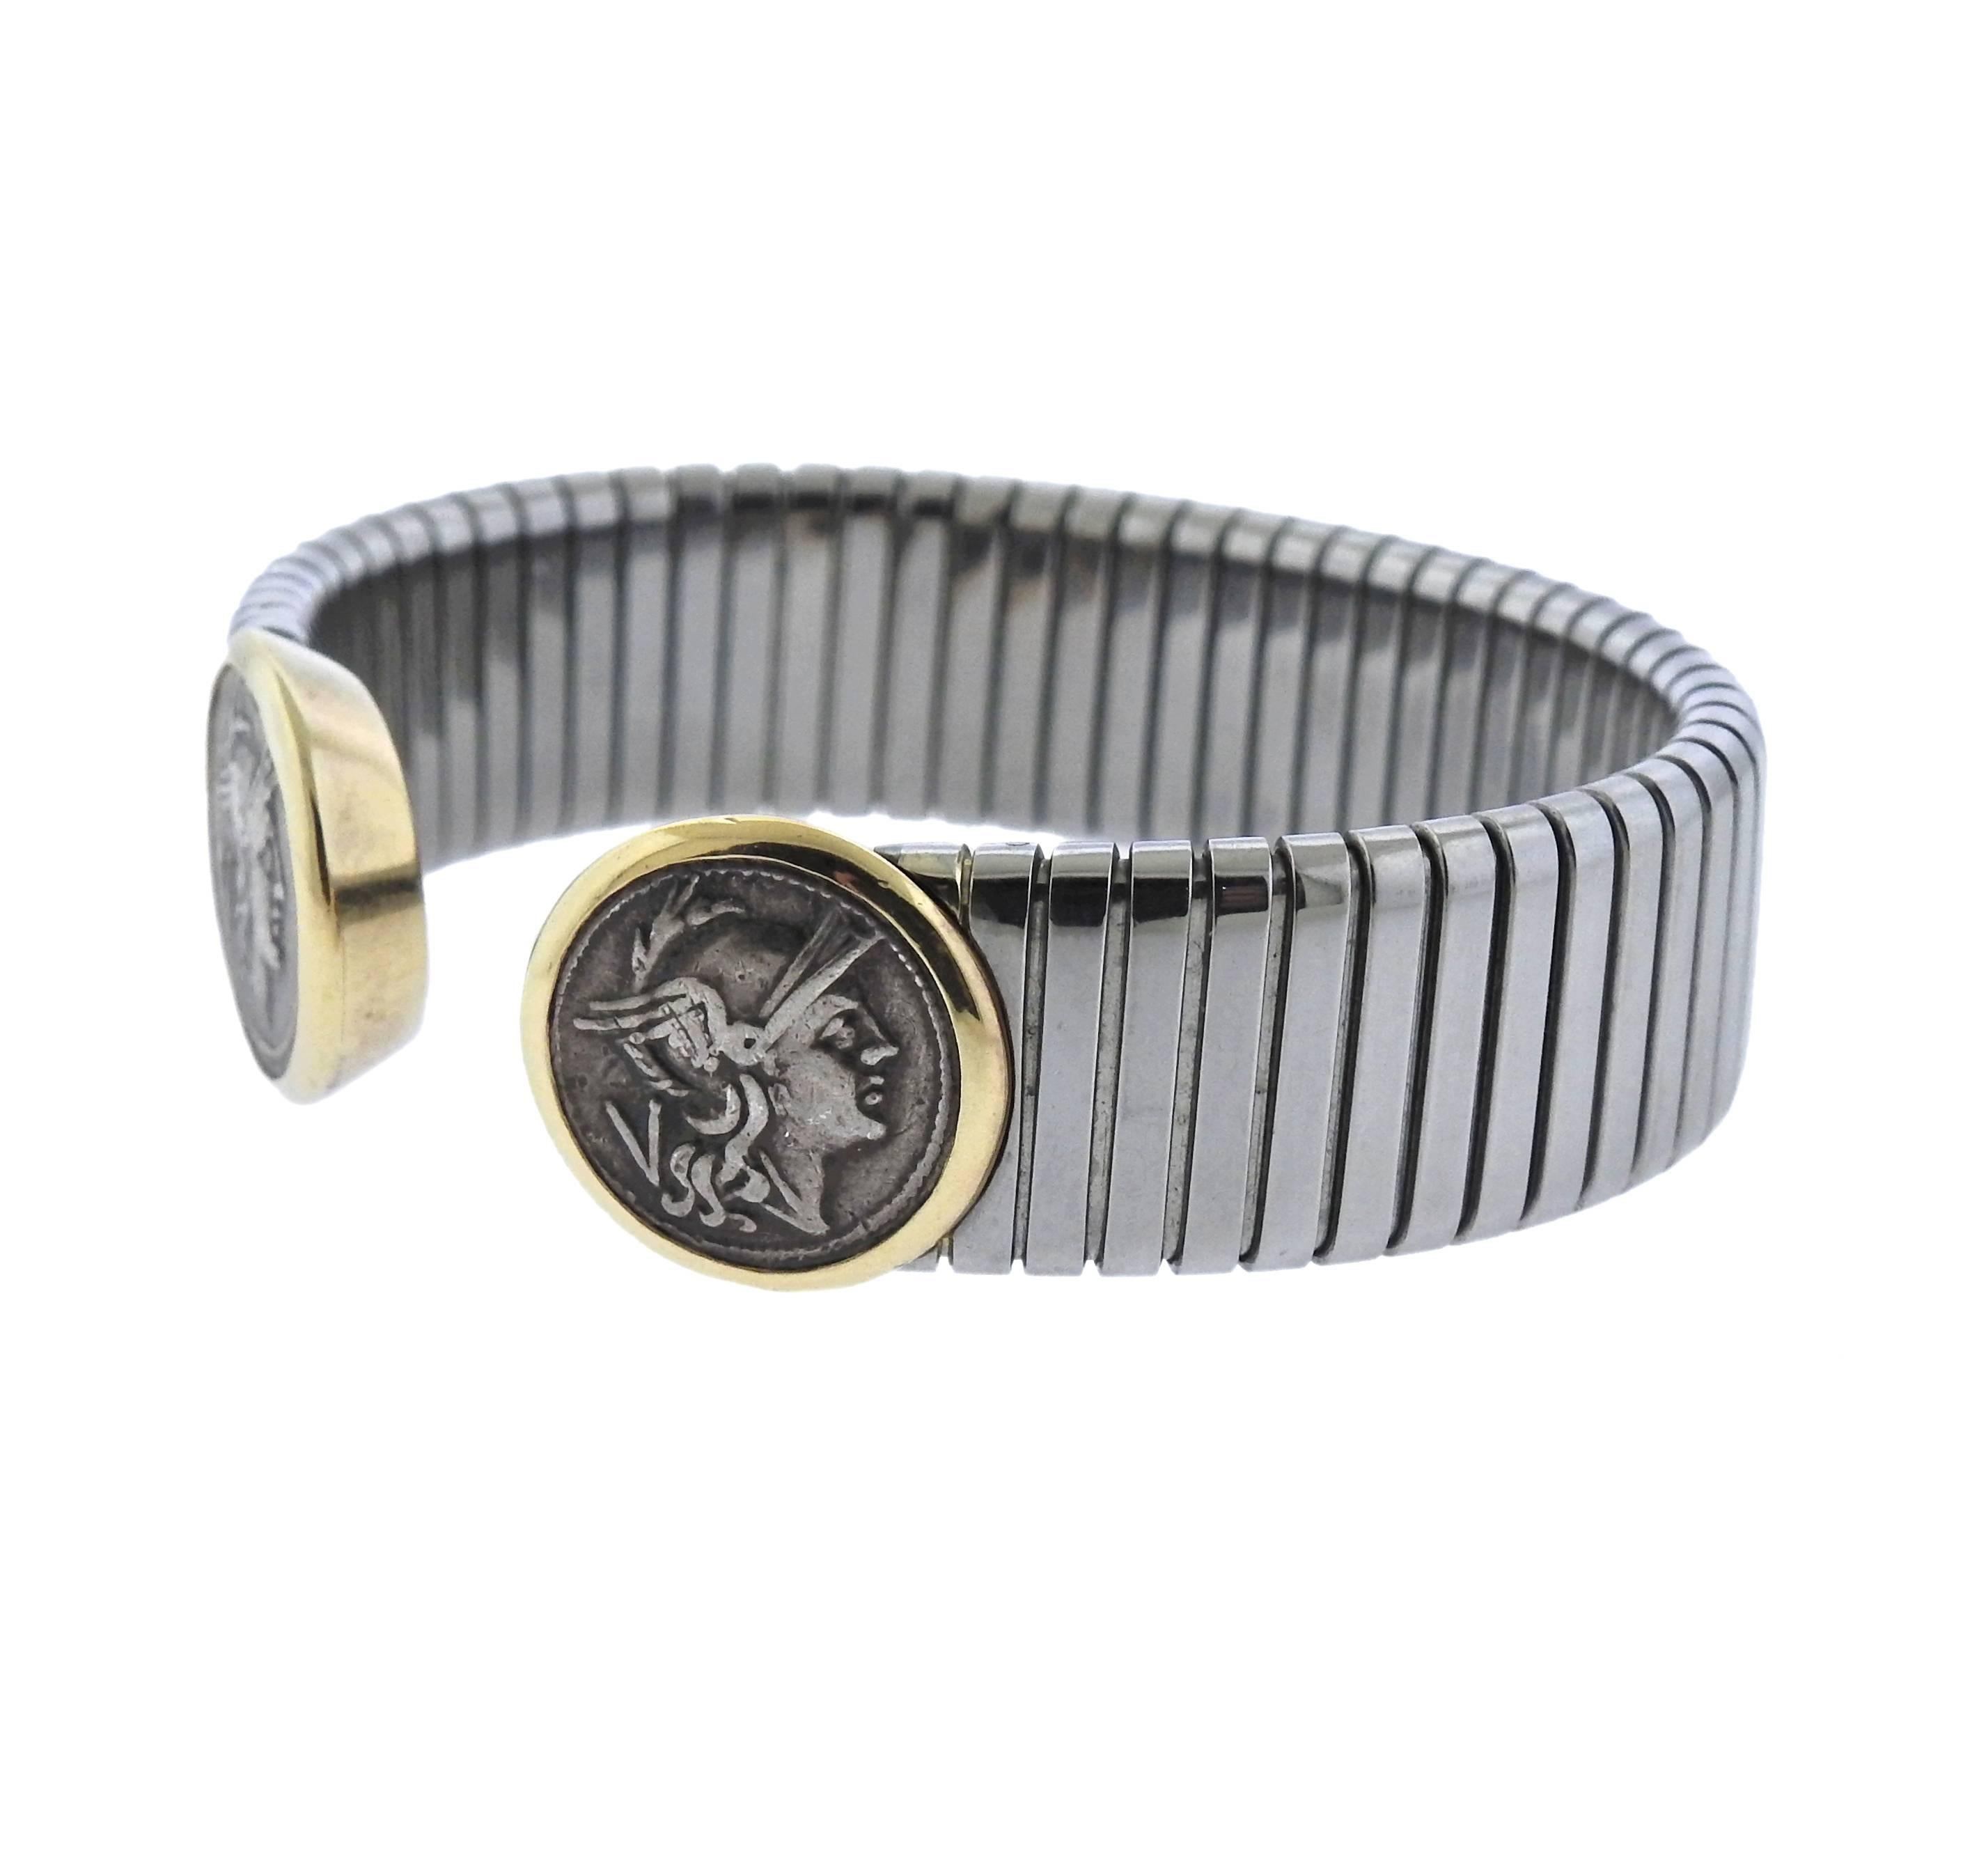 18k gold and stainless steel  cuff bracelet, crafted by Bulgari, set with two 15mm Ancient coins. Bracelet will fit approx. 6.75